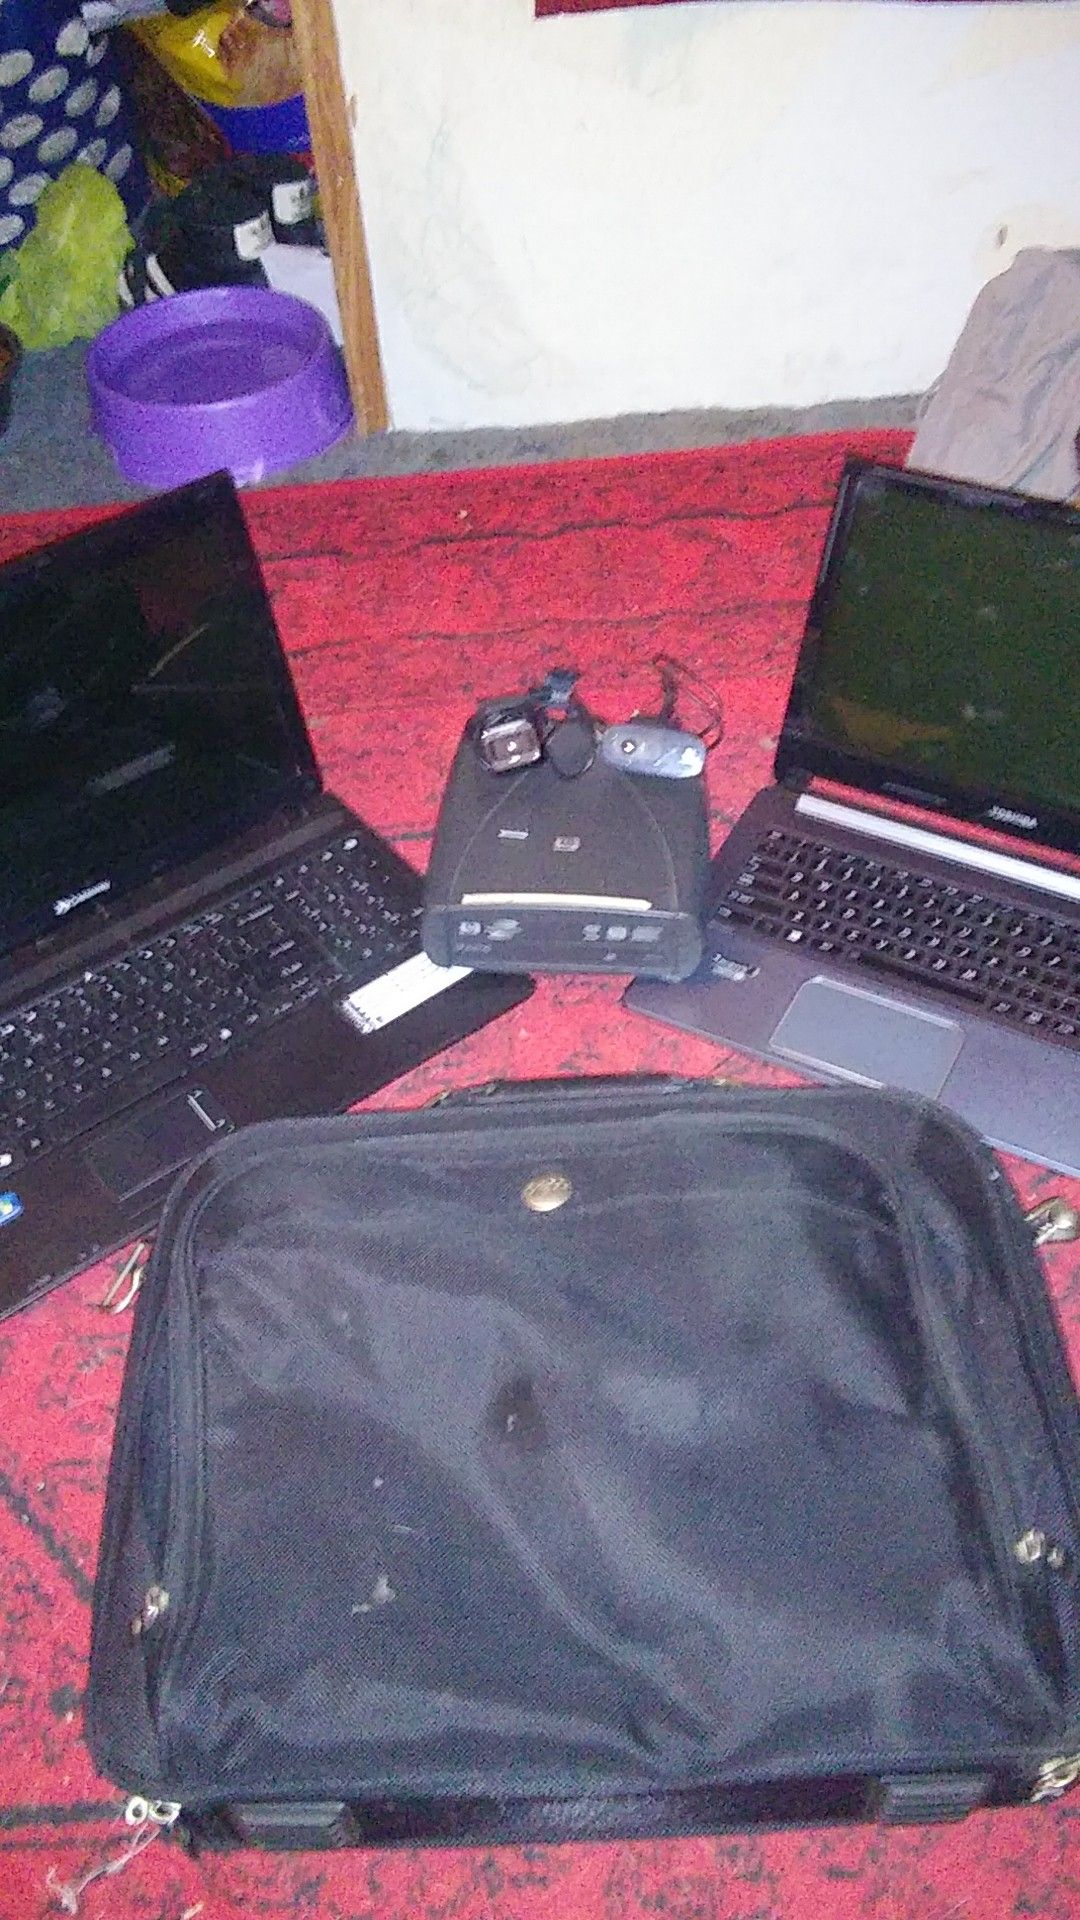 Gateway and Toshiba laptops and Dell labtop case